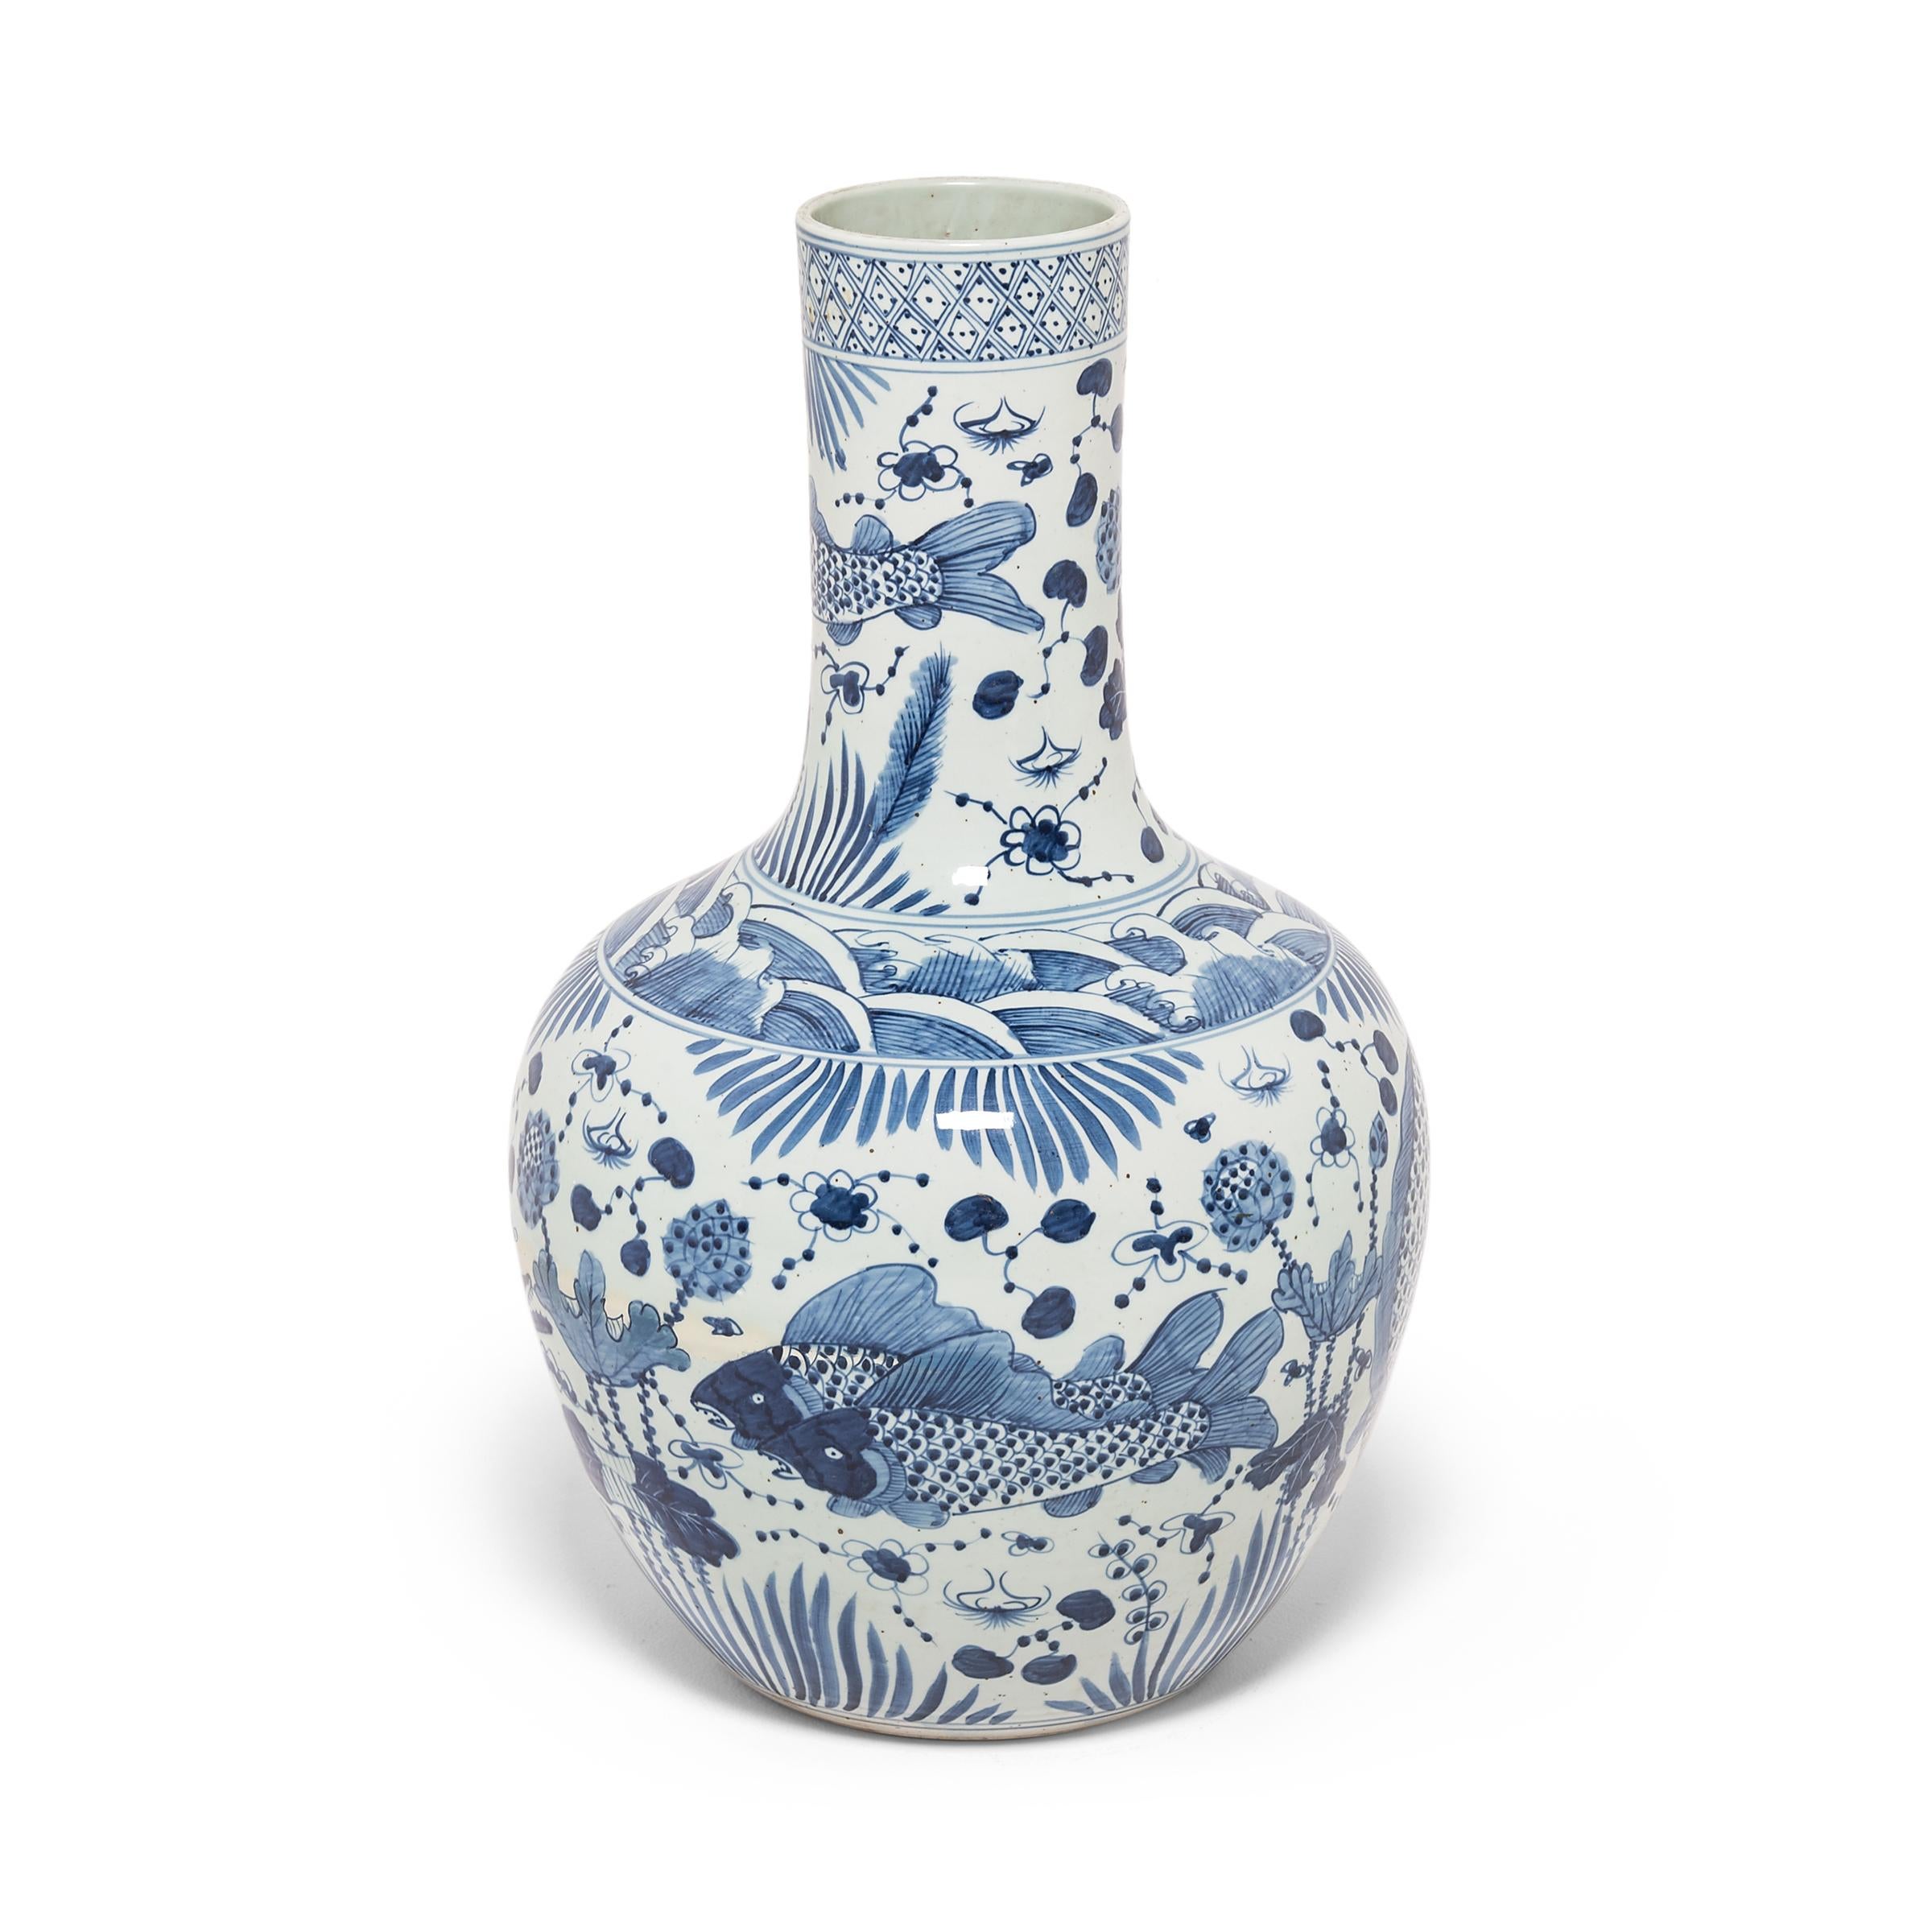 Revered for centuries for its elegant designs and rich cobalt blue and pure white colors, traditional Chinese blue-and-white porcelain lives on in this hand-painted bottleneck vase. Delicately rendered with fish and flora beneath fanciful waves, the